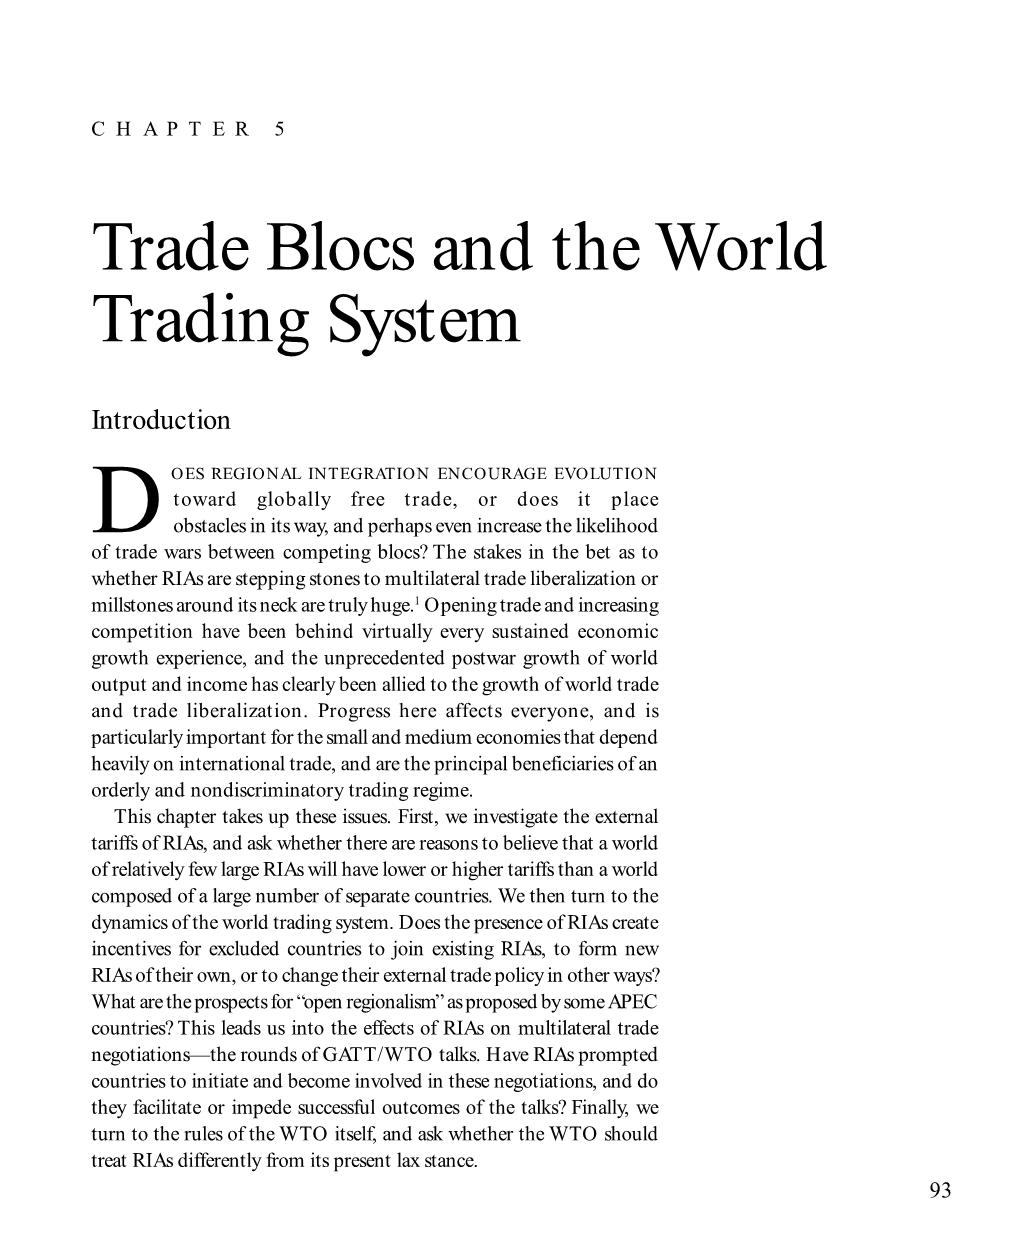 Trade Blocs and the World Trading System